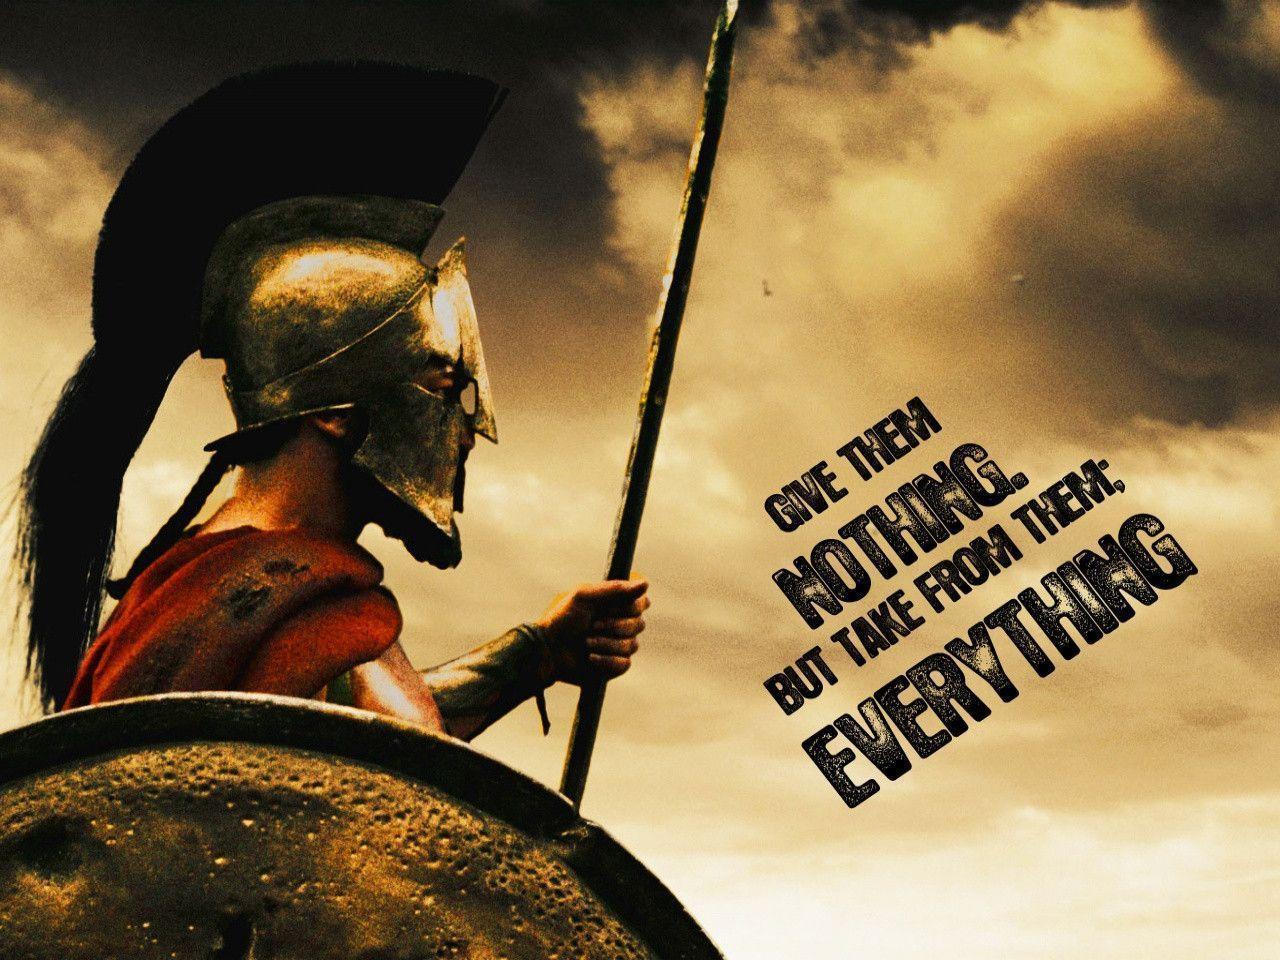 Wallpapers For > Spartan Warrior 300 Wallpaper - Spartan Give Them Nothing , HD Wallpaper & Backgrounds